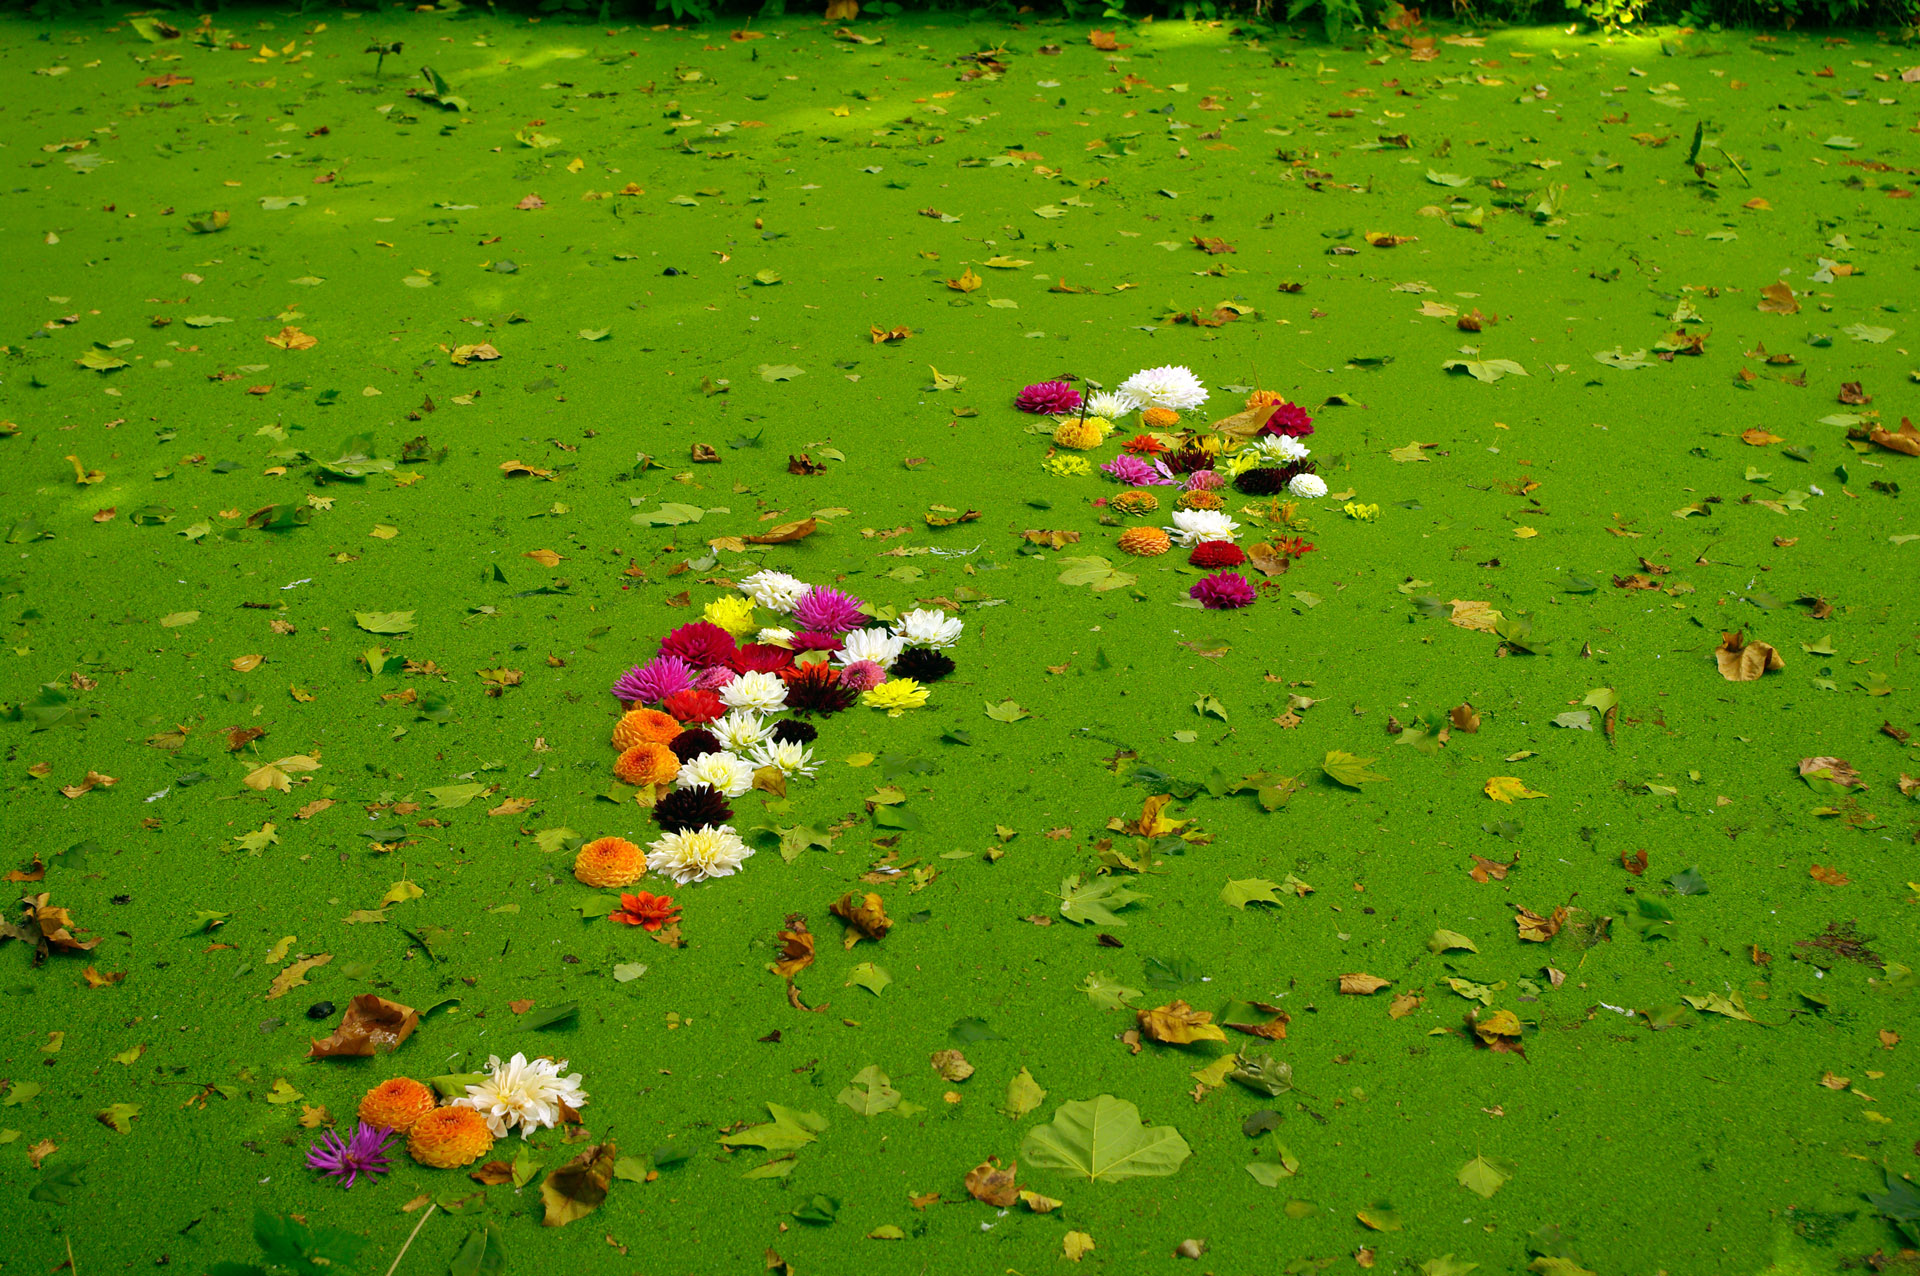 anglesey abbey Dahlia festival flowers floating duckweed covered